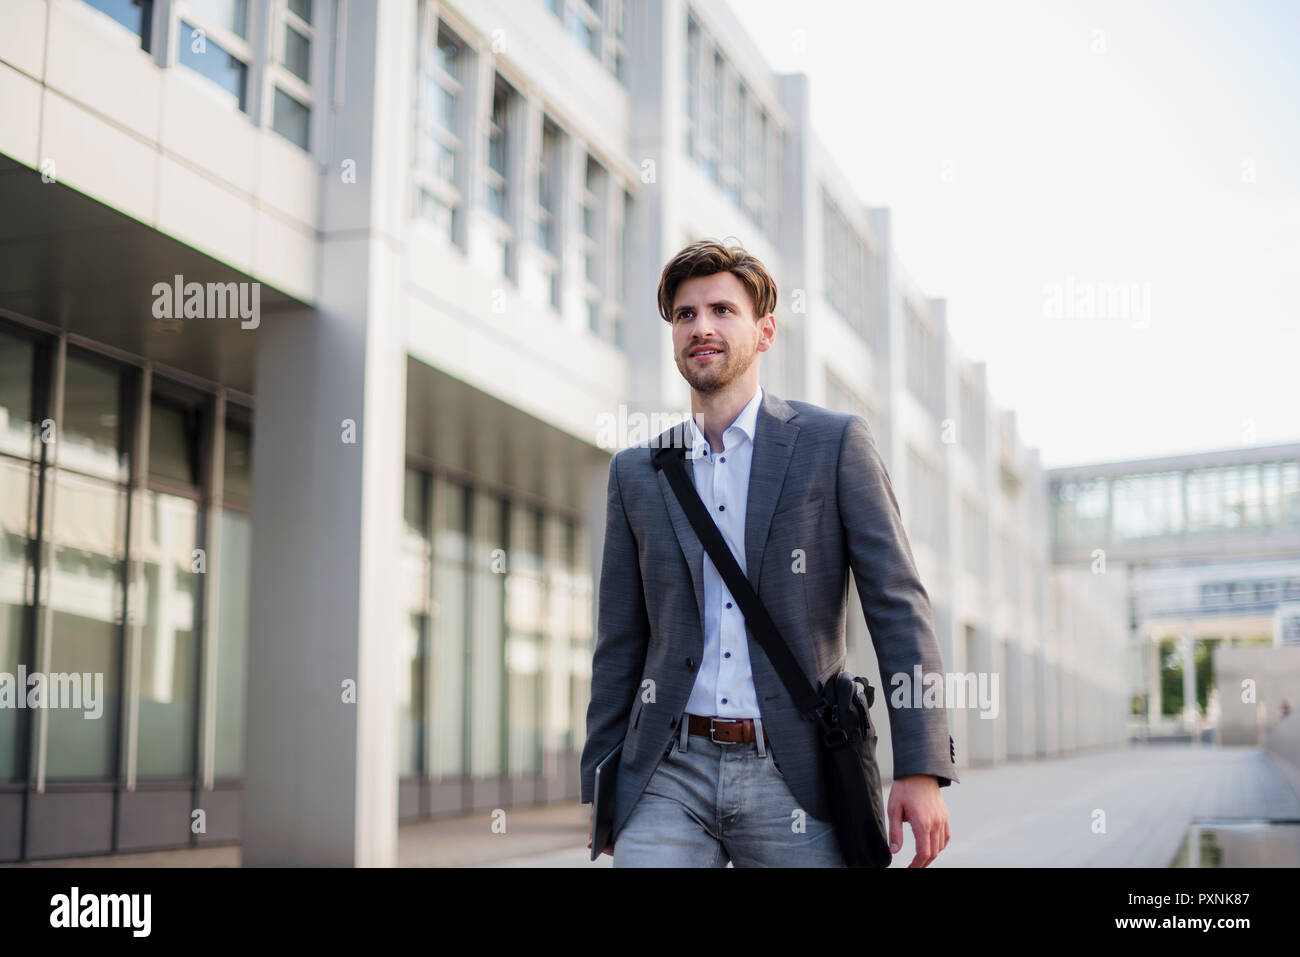 Smiling businessman with crossbody bag in the city on the move Stock Photo